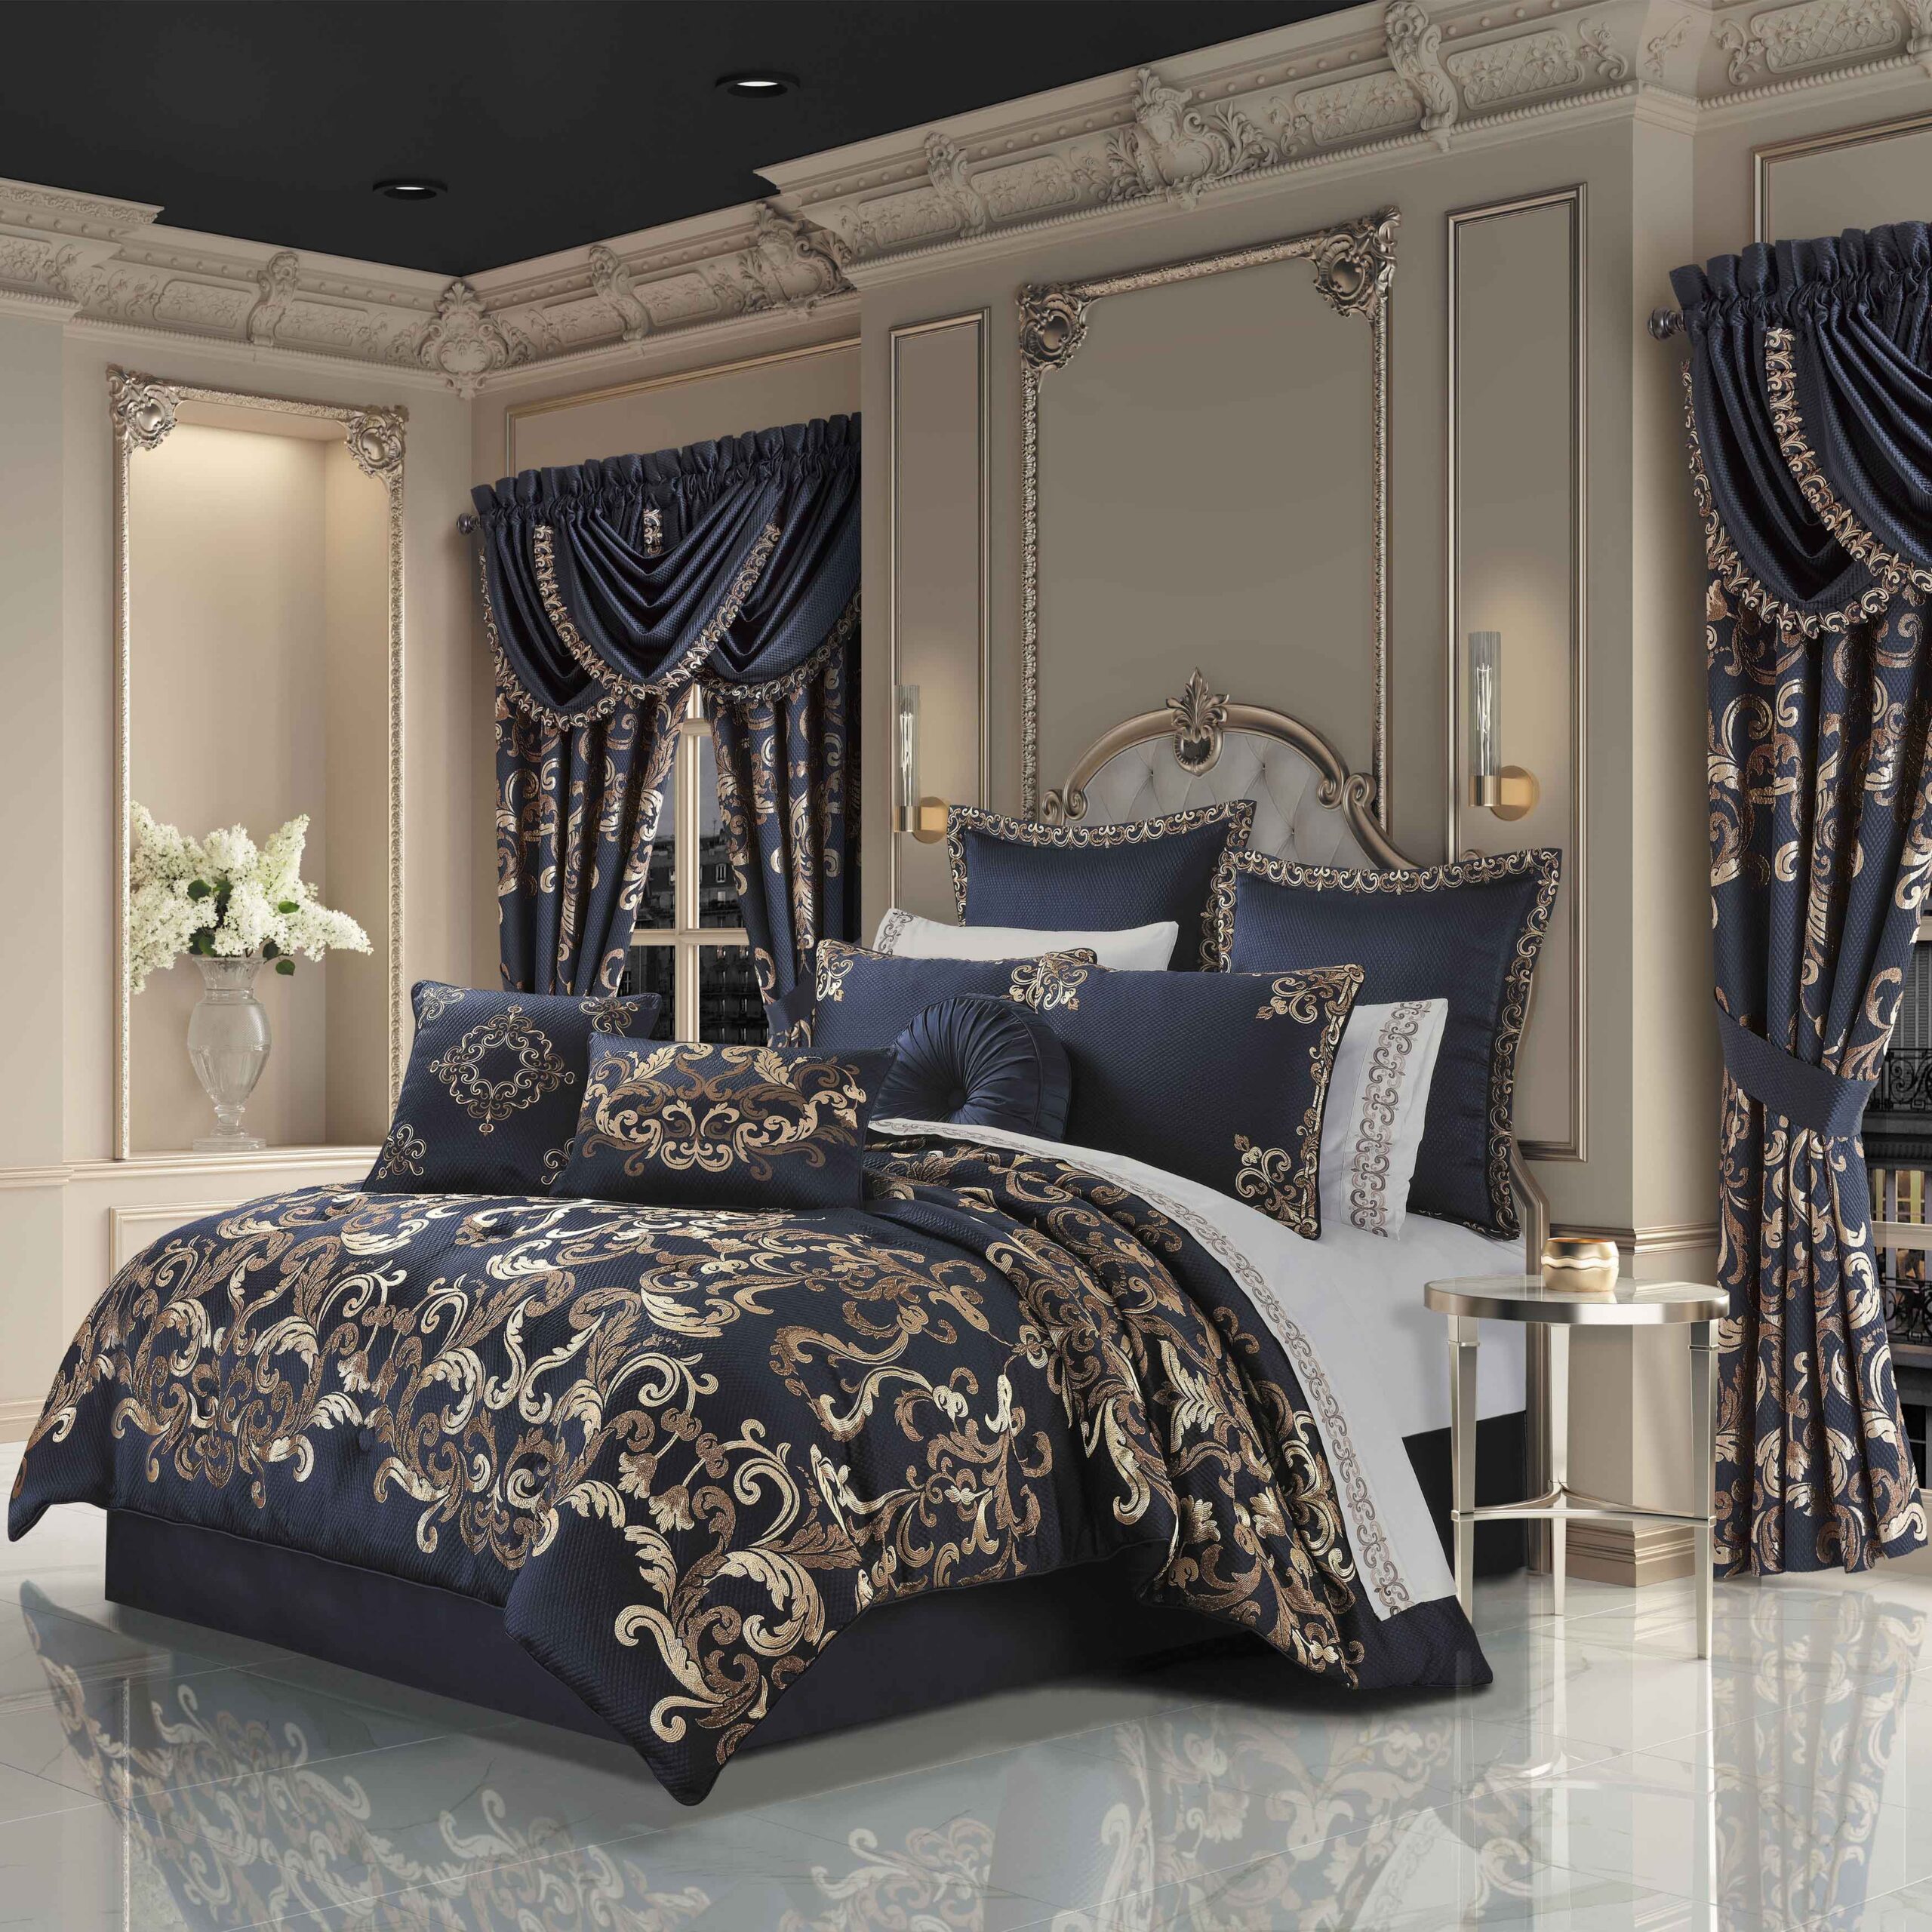 Luxury Comforter Sets With Matching Curtains - Latest Bedding Blog